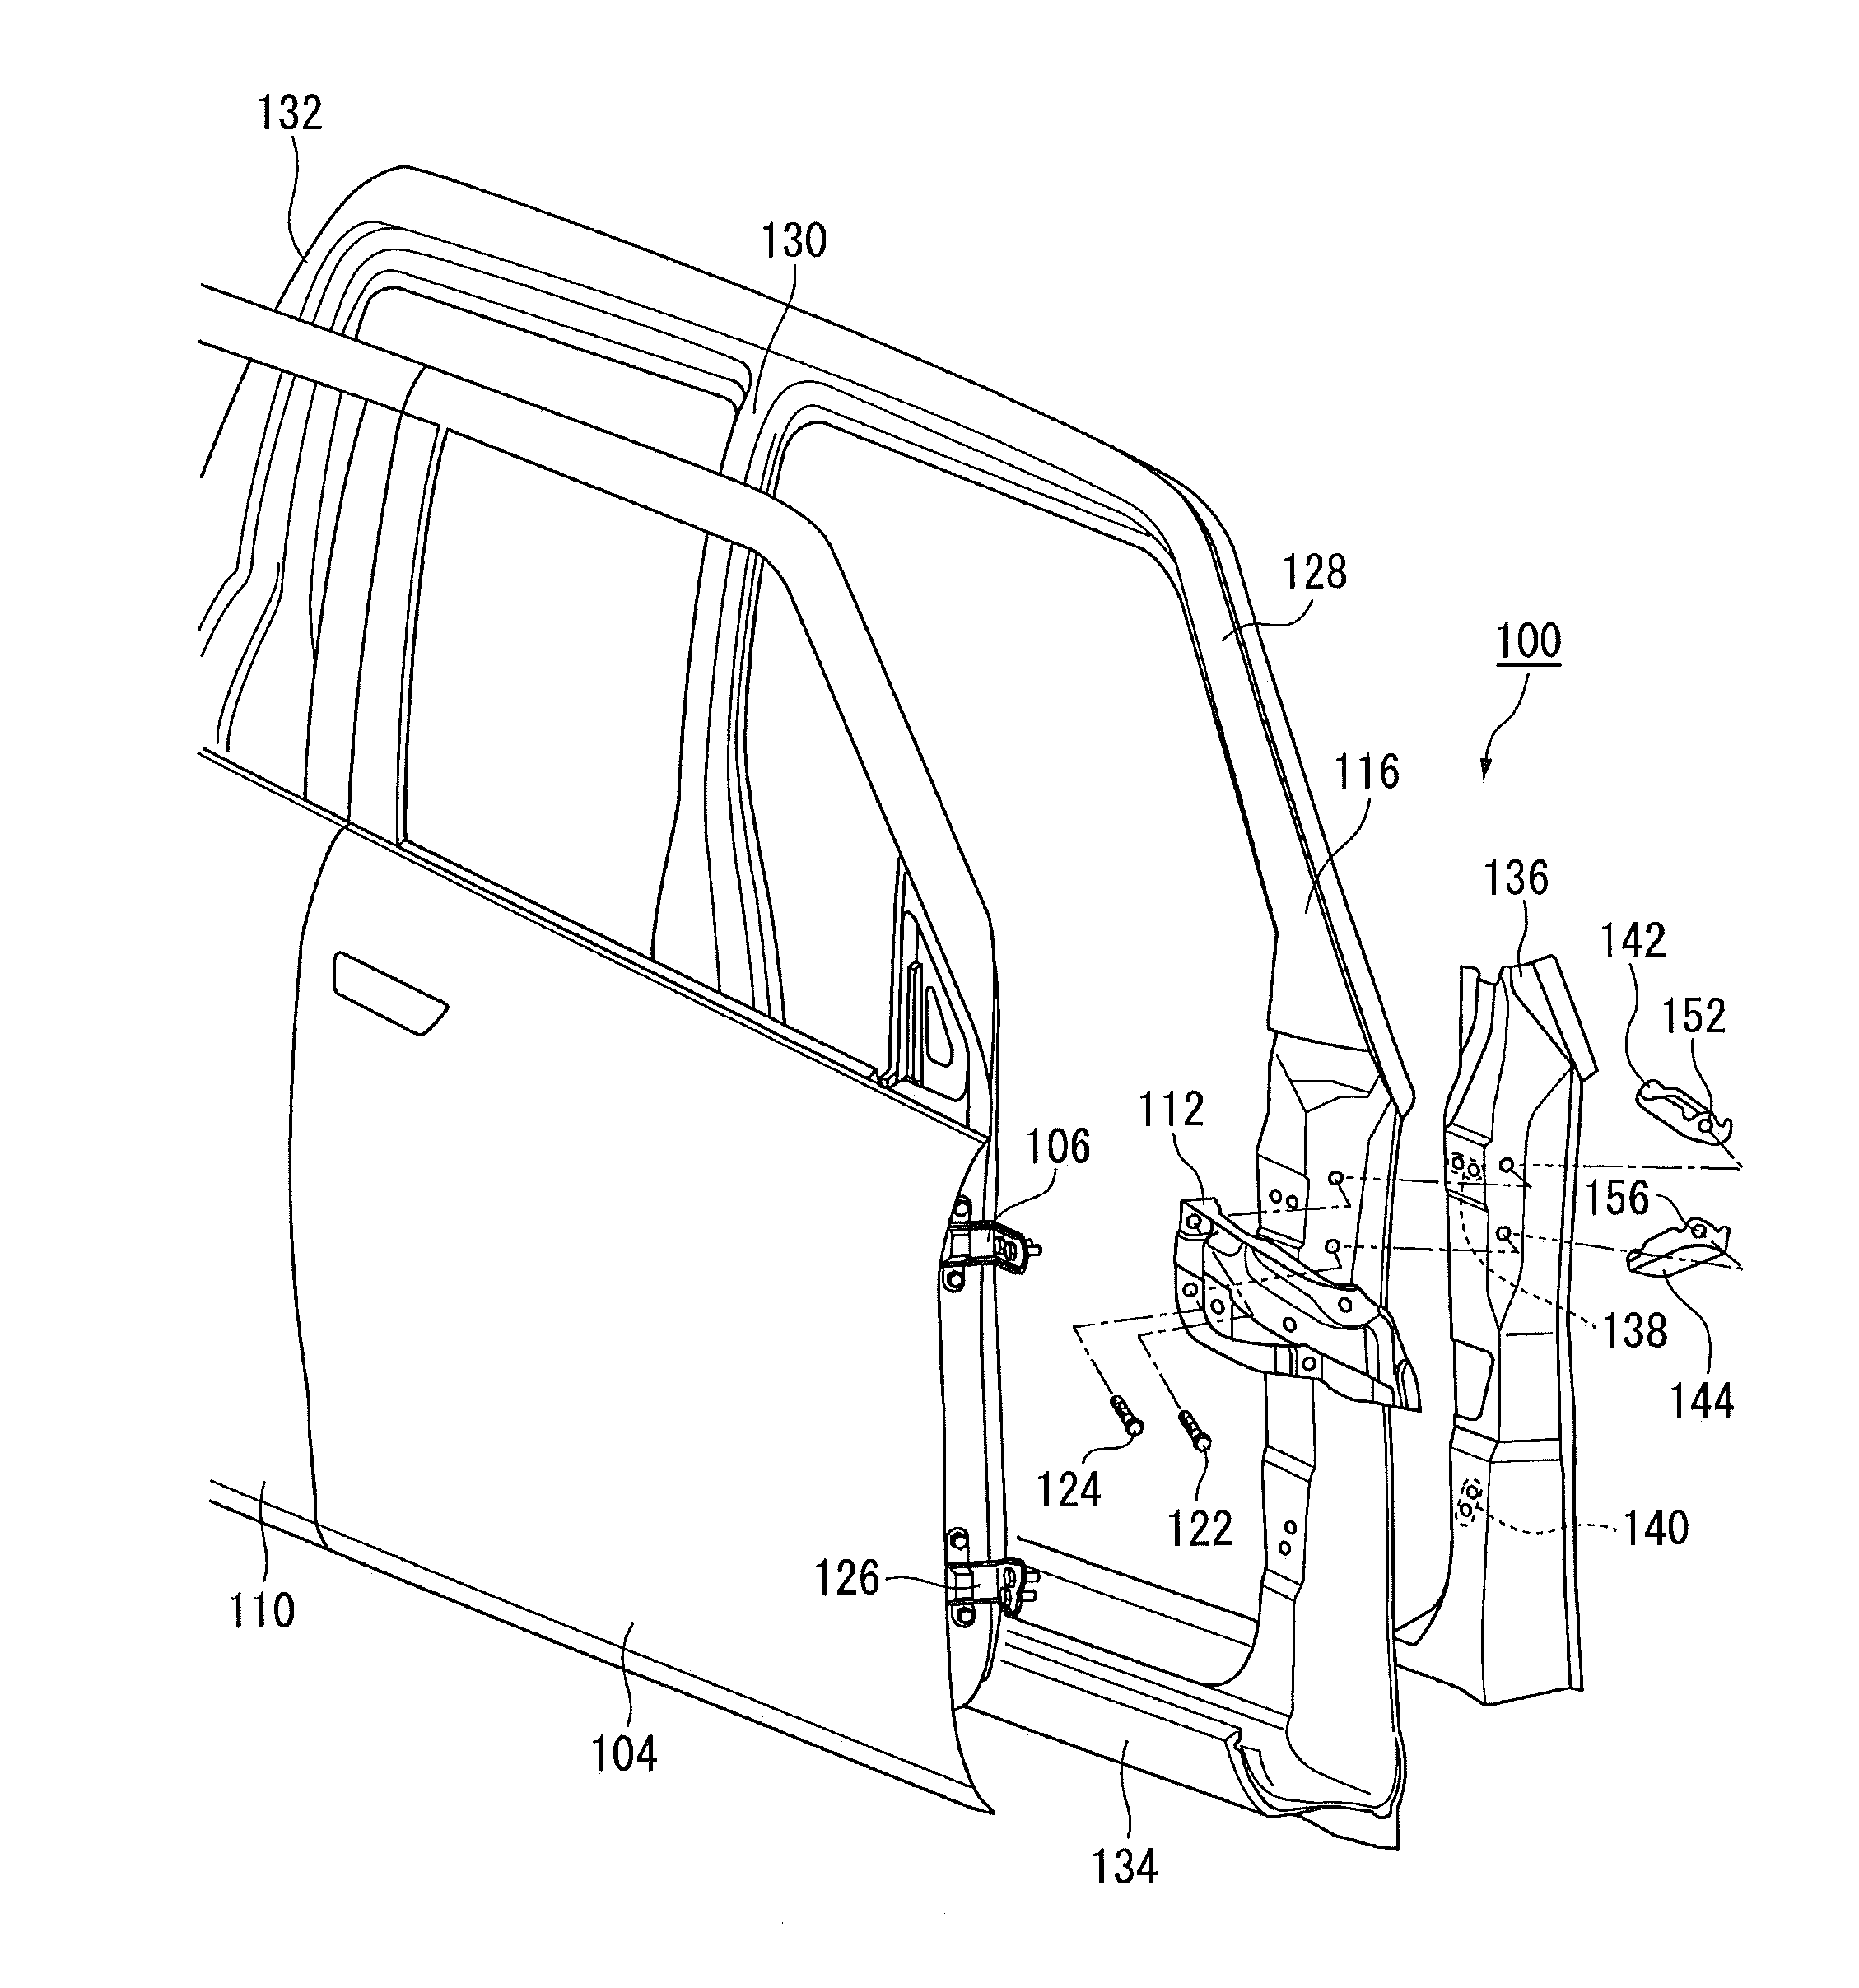 Vehicle body reinforcing structure